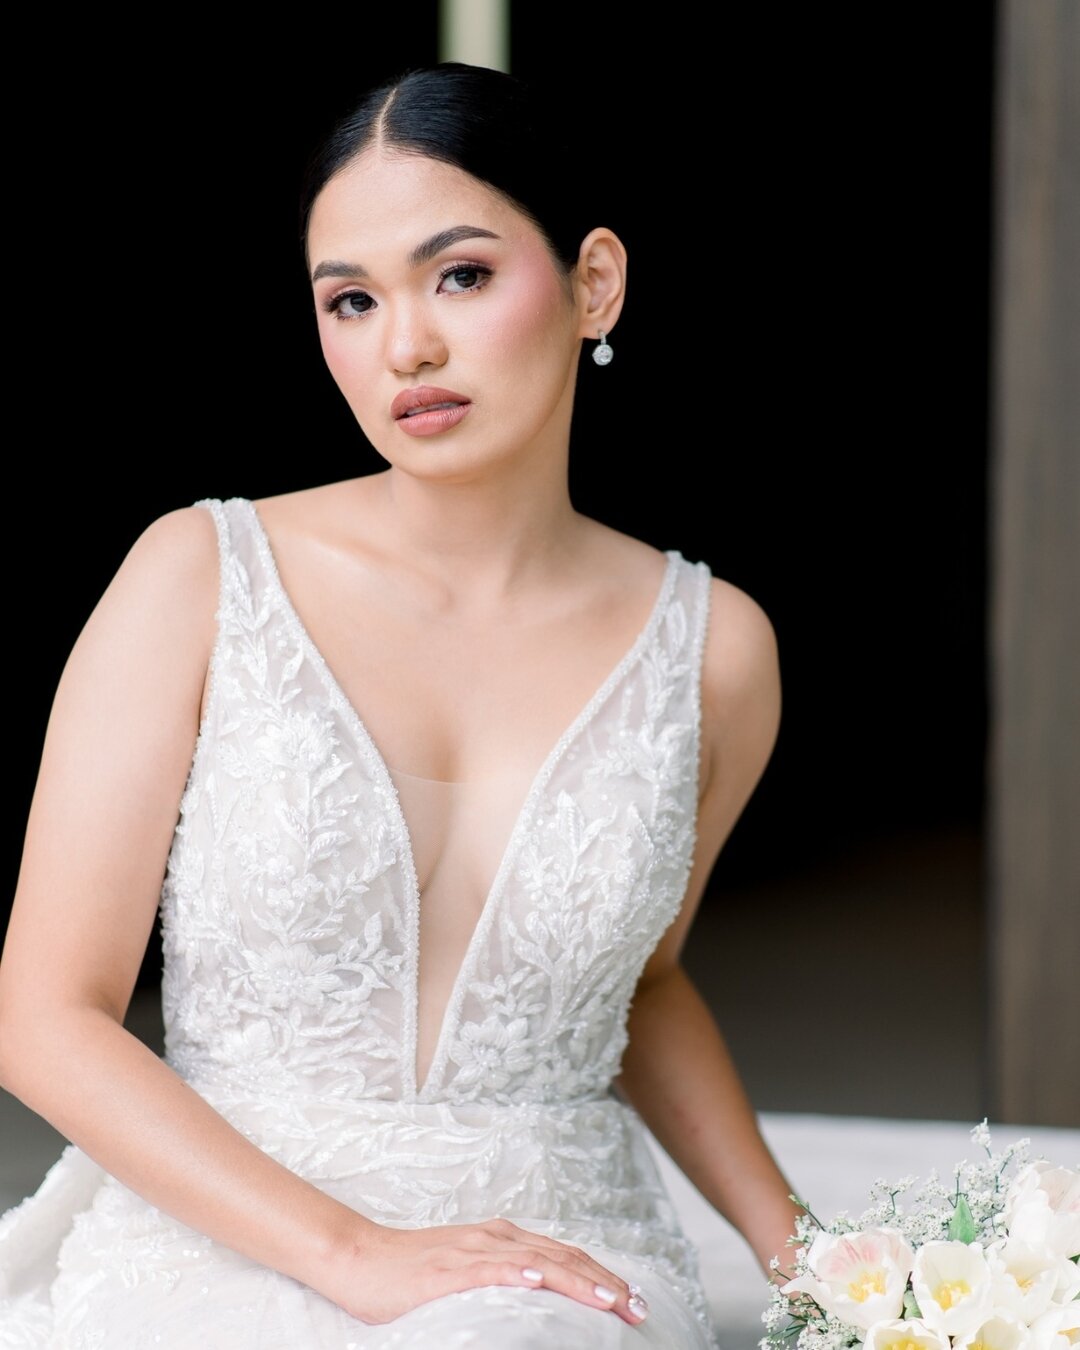 Bringing bridal bliss to your feed with our radiant bride, Judith ✨ Tag a bride-to-be who needs this inspo. 

#bridalglow #brideideas #bridalbeauty #eventsbytr #weddingsph #eventsph #weddings #weddingplannerph #brideandbreakfast #brideandbreakfastph 